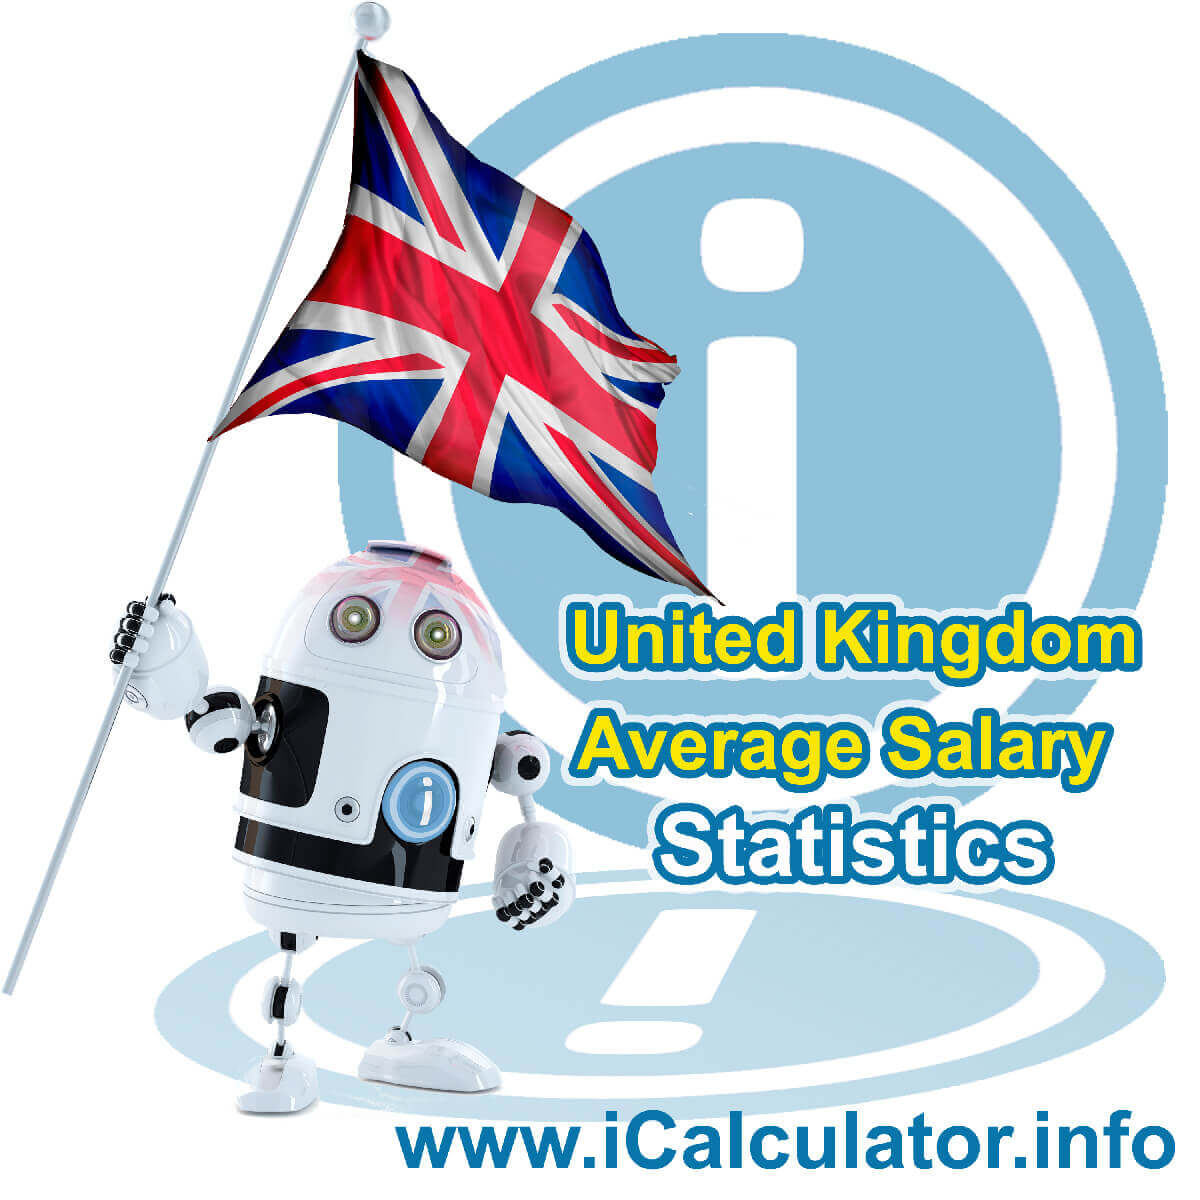 UK Average Salary in 2023. This image shows the United Kingdom flag and information relating to the salary statistics and average salary in the UK in 2023